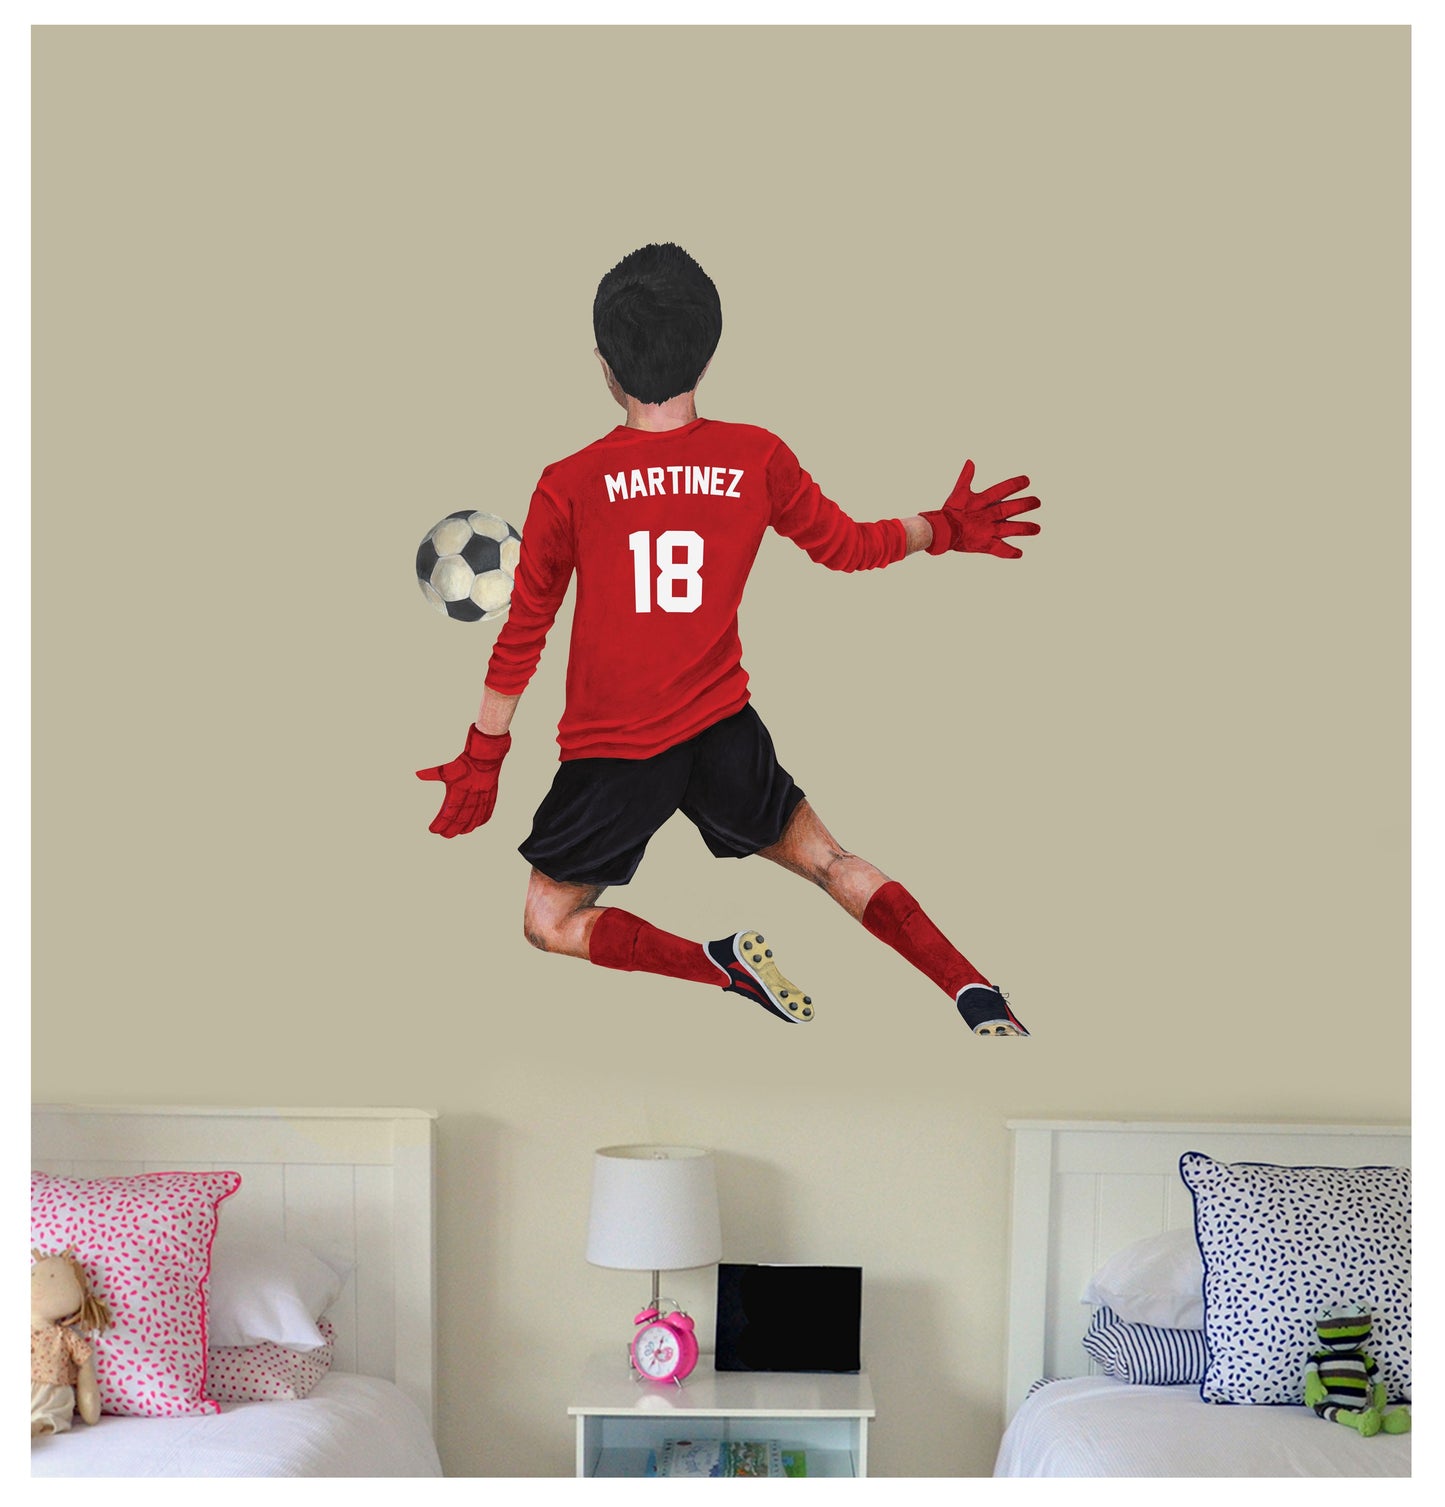 Design and order custom sports wall decals with your favorite team colors, logos, and motivational quotes.